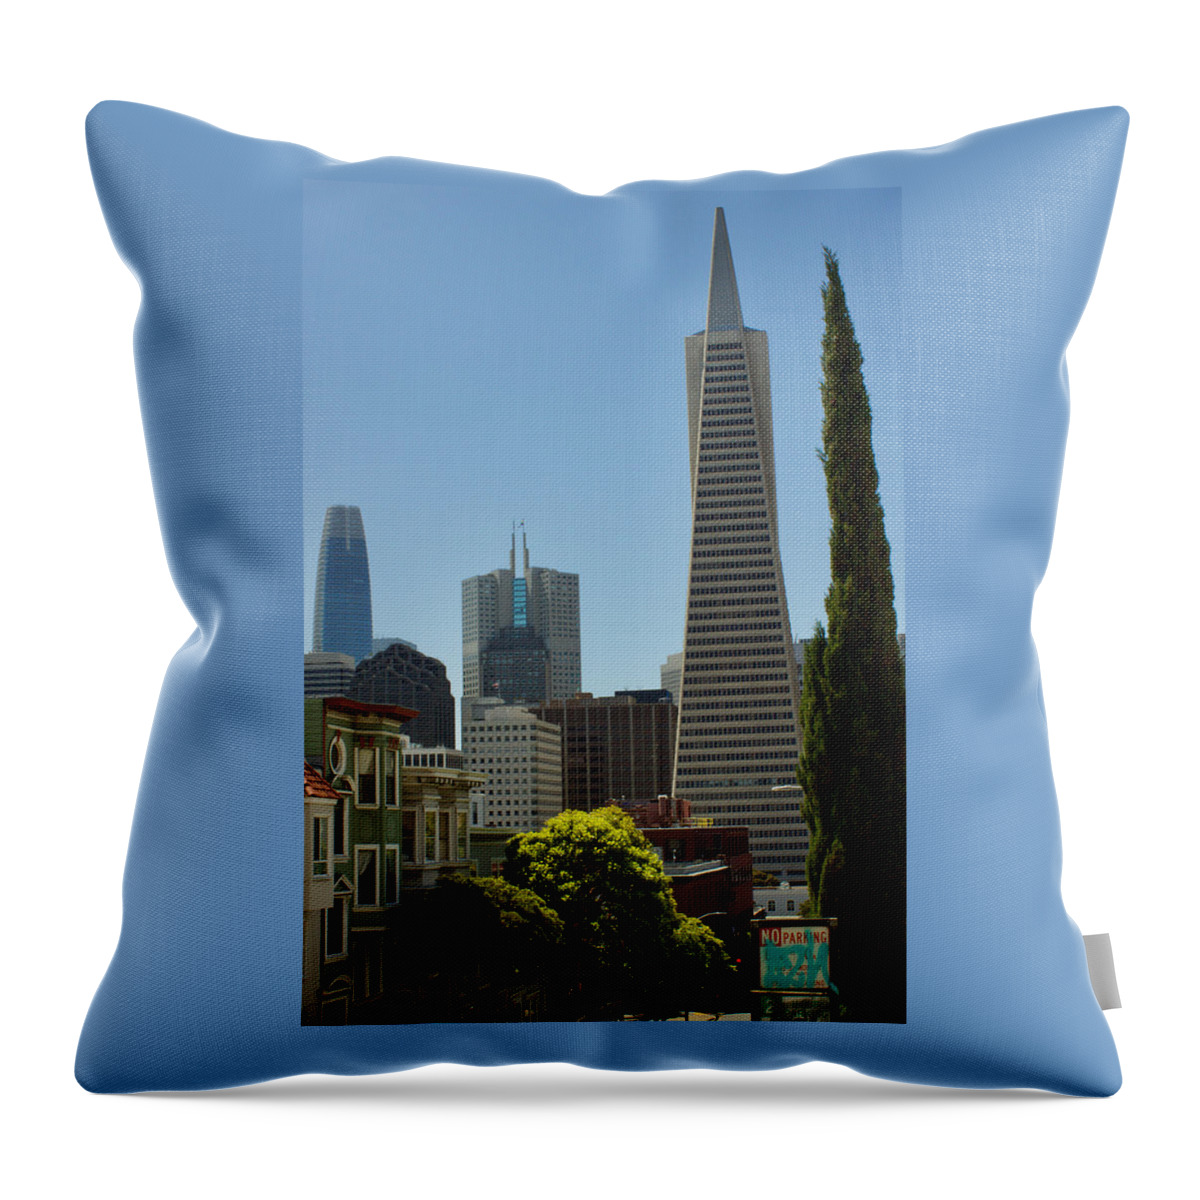 San Francisco Throw Pillow featuring the photograph Reaching For The Sky by Dan Twomey